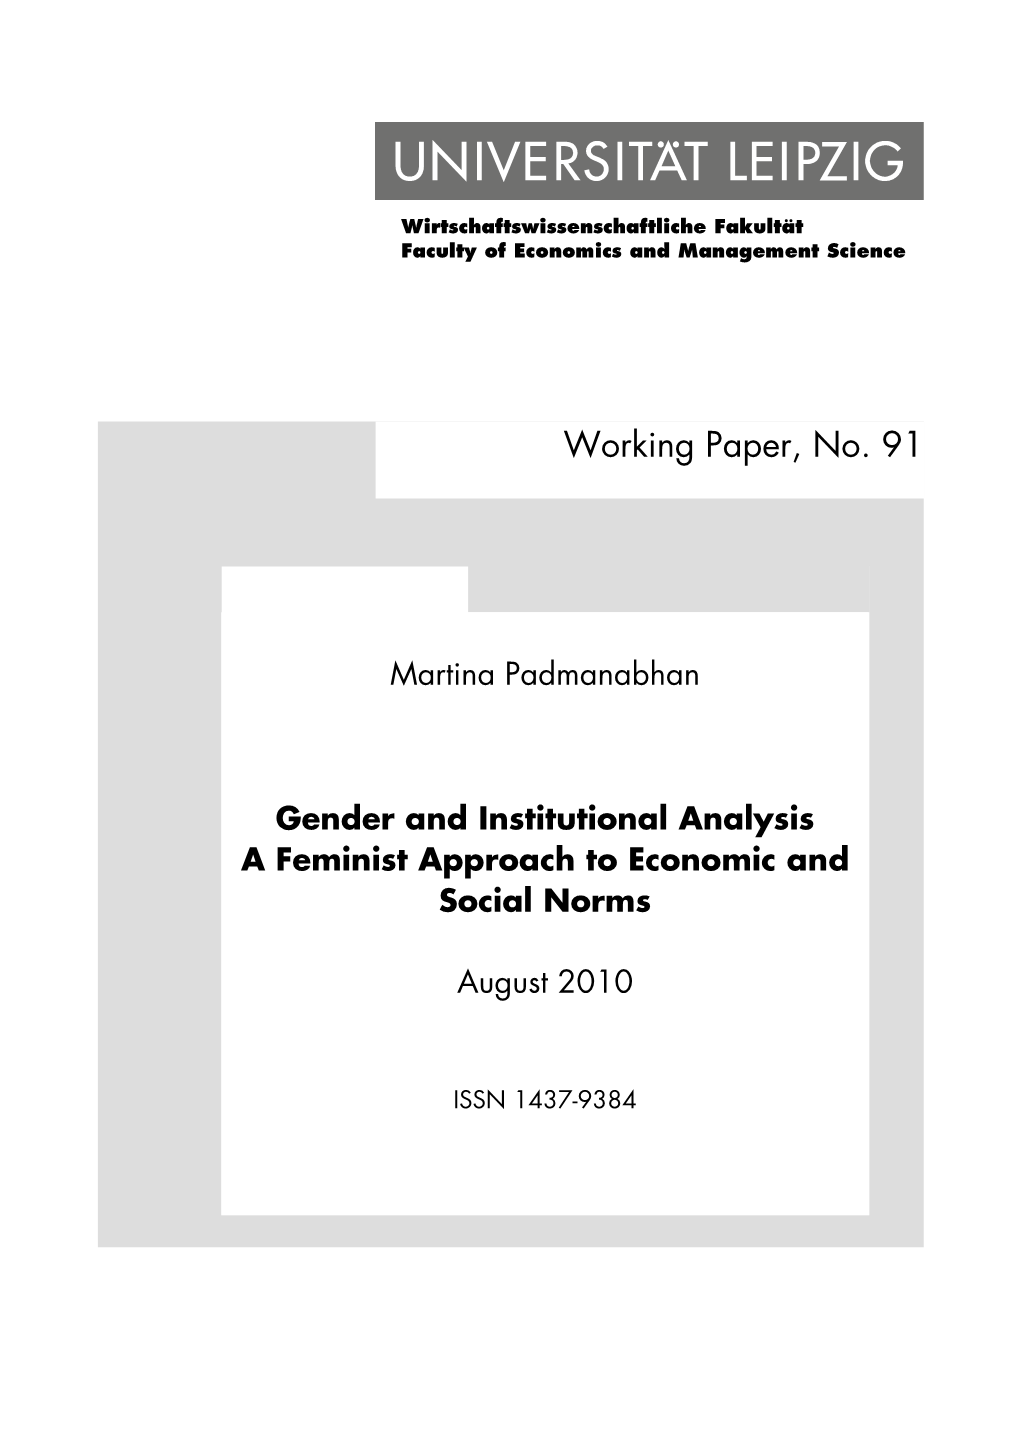 Gender and Institutional Analysis. a Feminist Approach to Economic